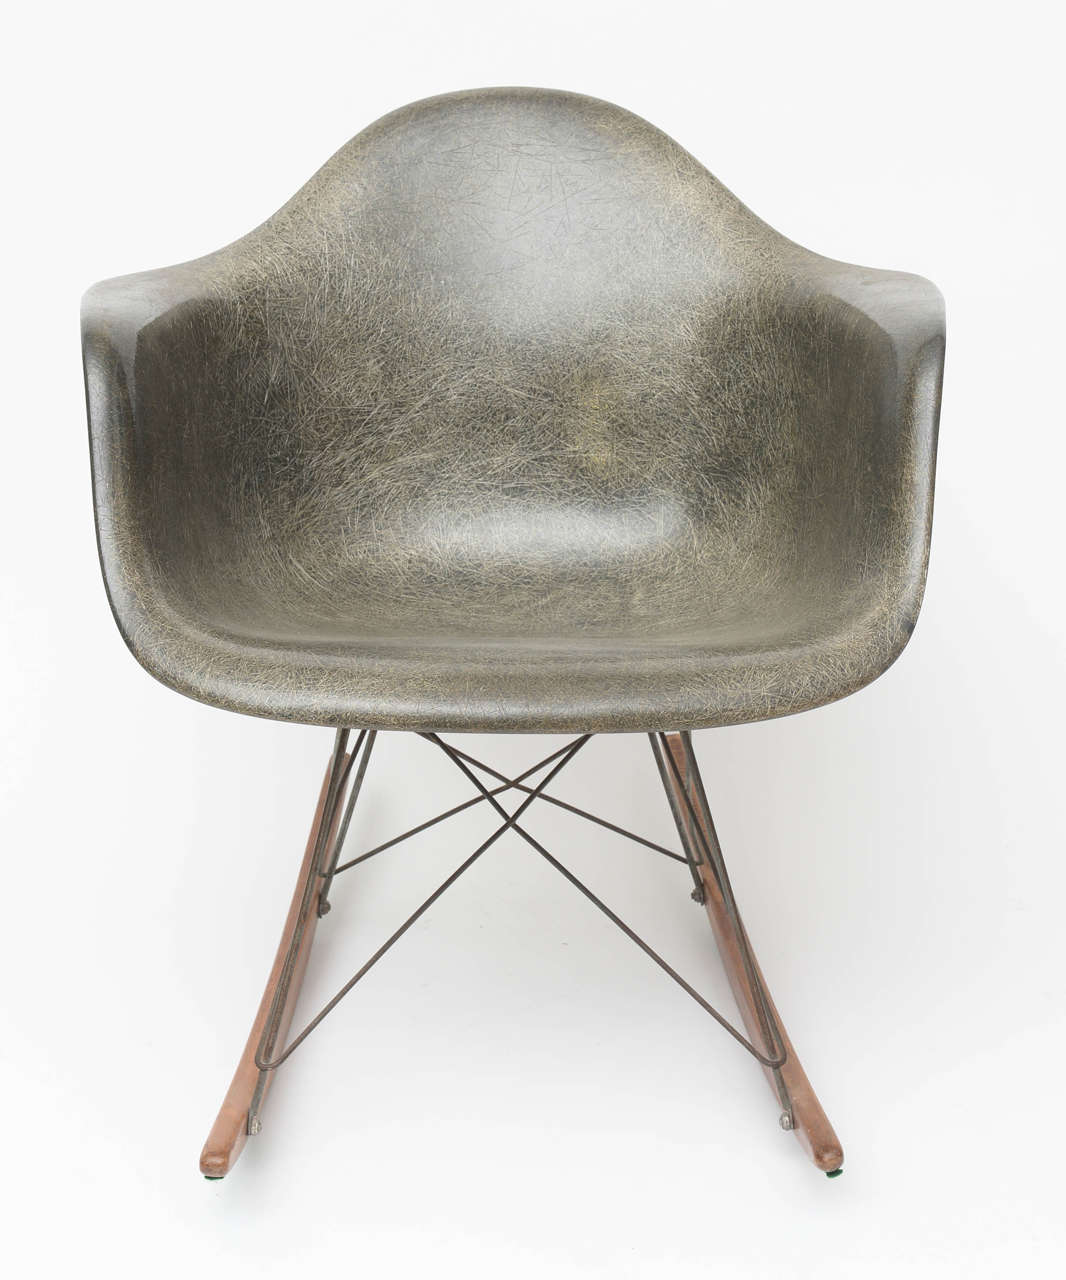 This is a first edition rocker, featuring front struts that connect to the back legs and a great elephant hide grey shell.